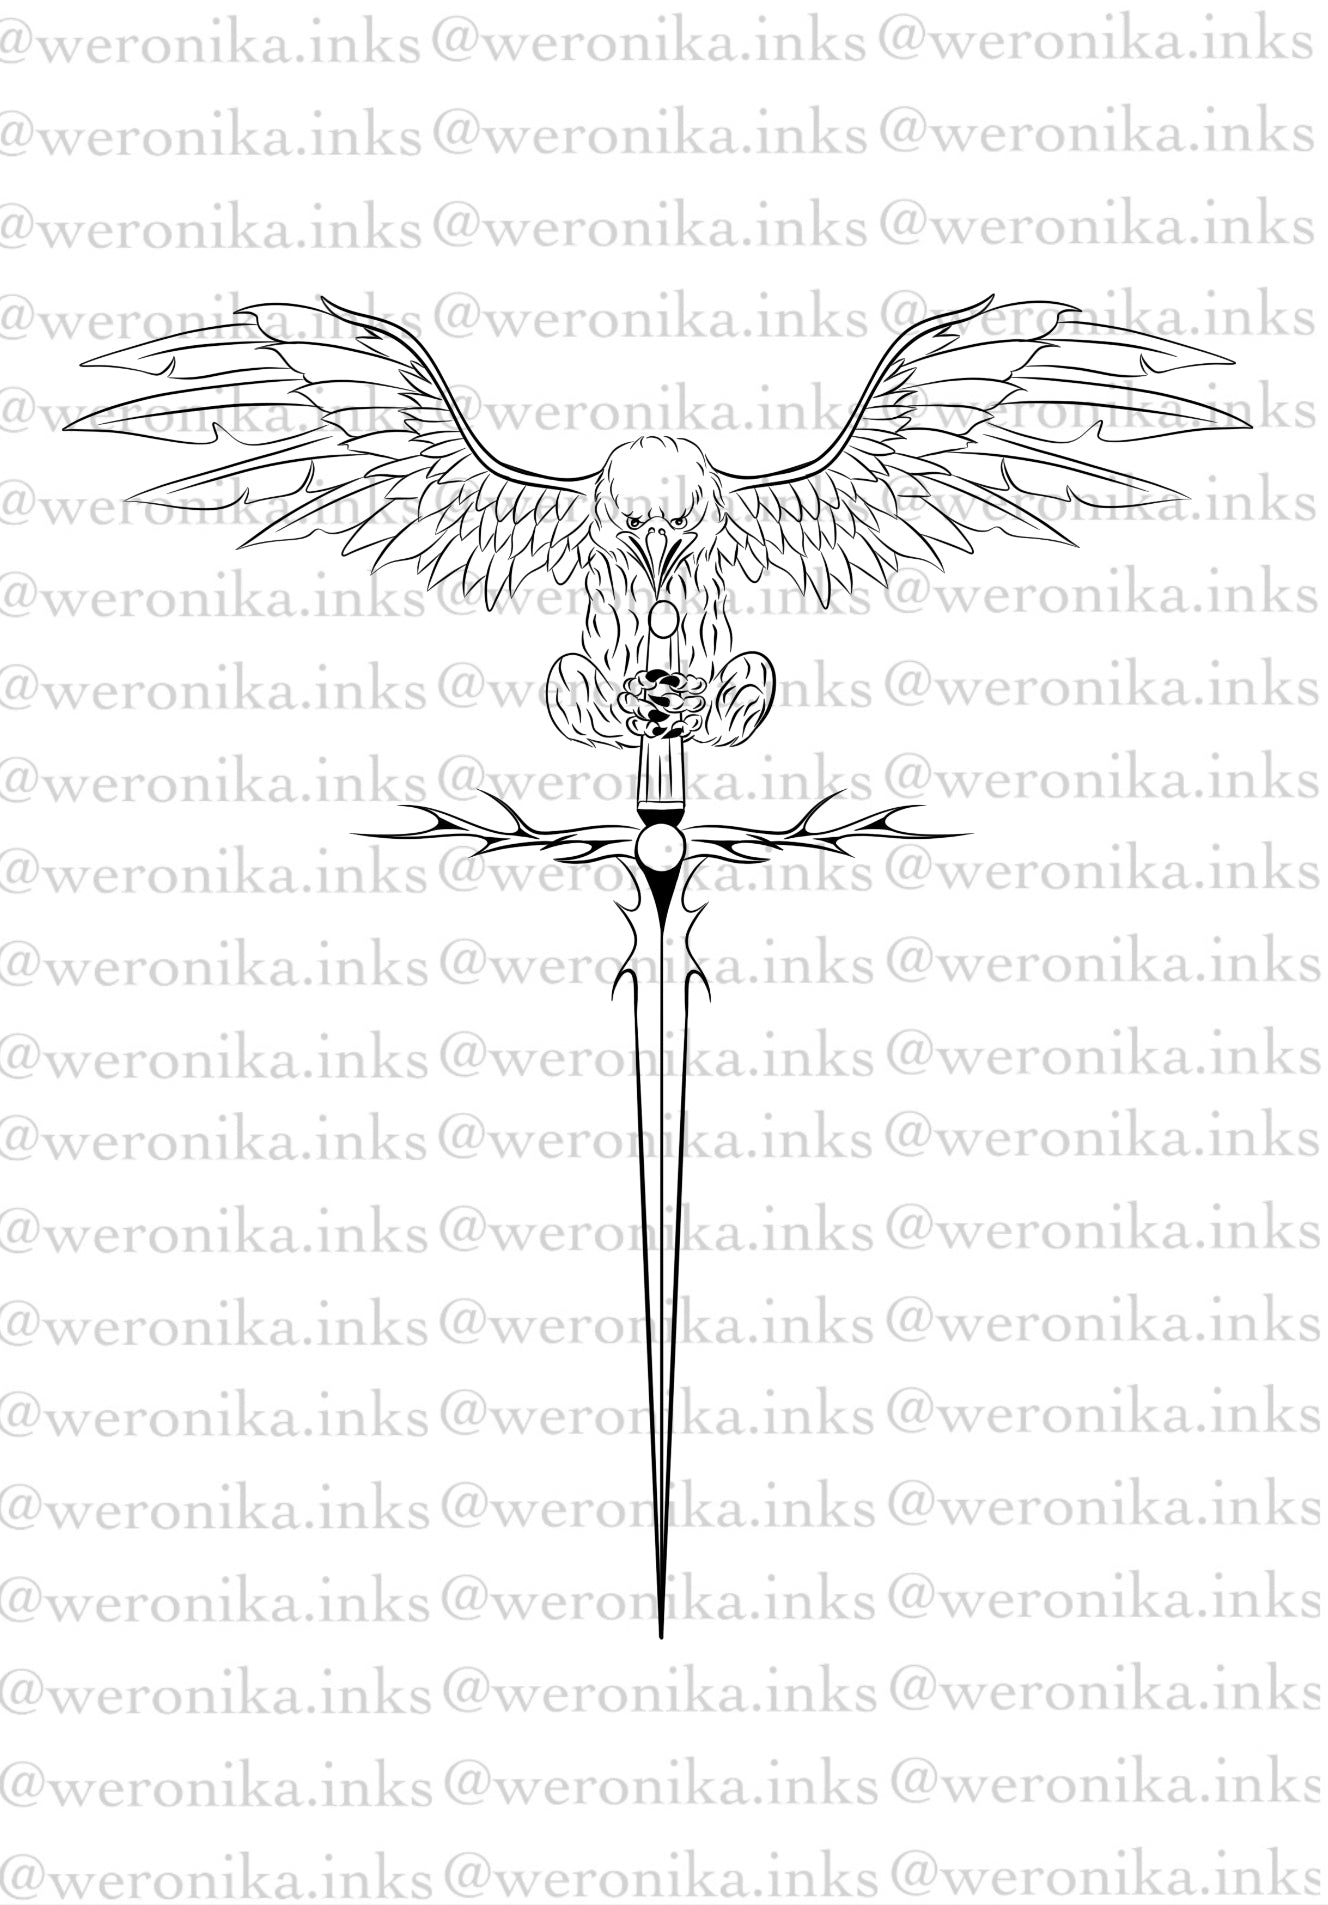 sword and wings tattoo